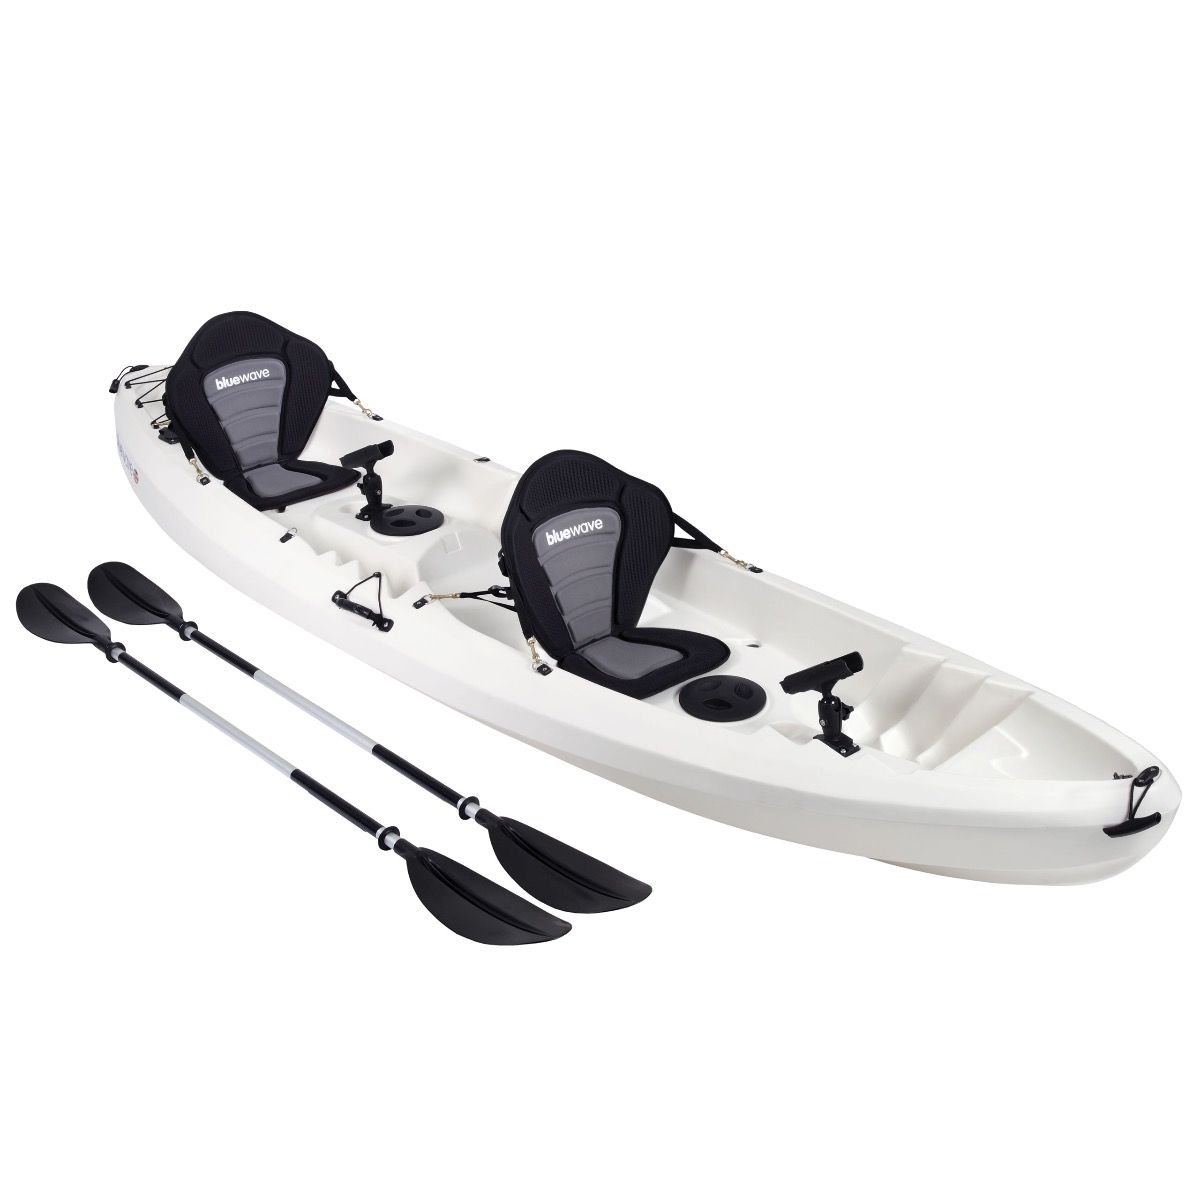 Bluewave Convoy Double Sit On Top Kayak Package - Perfect for